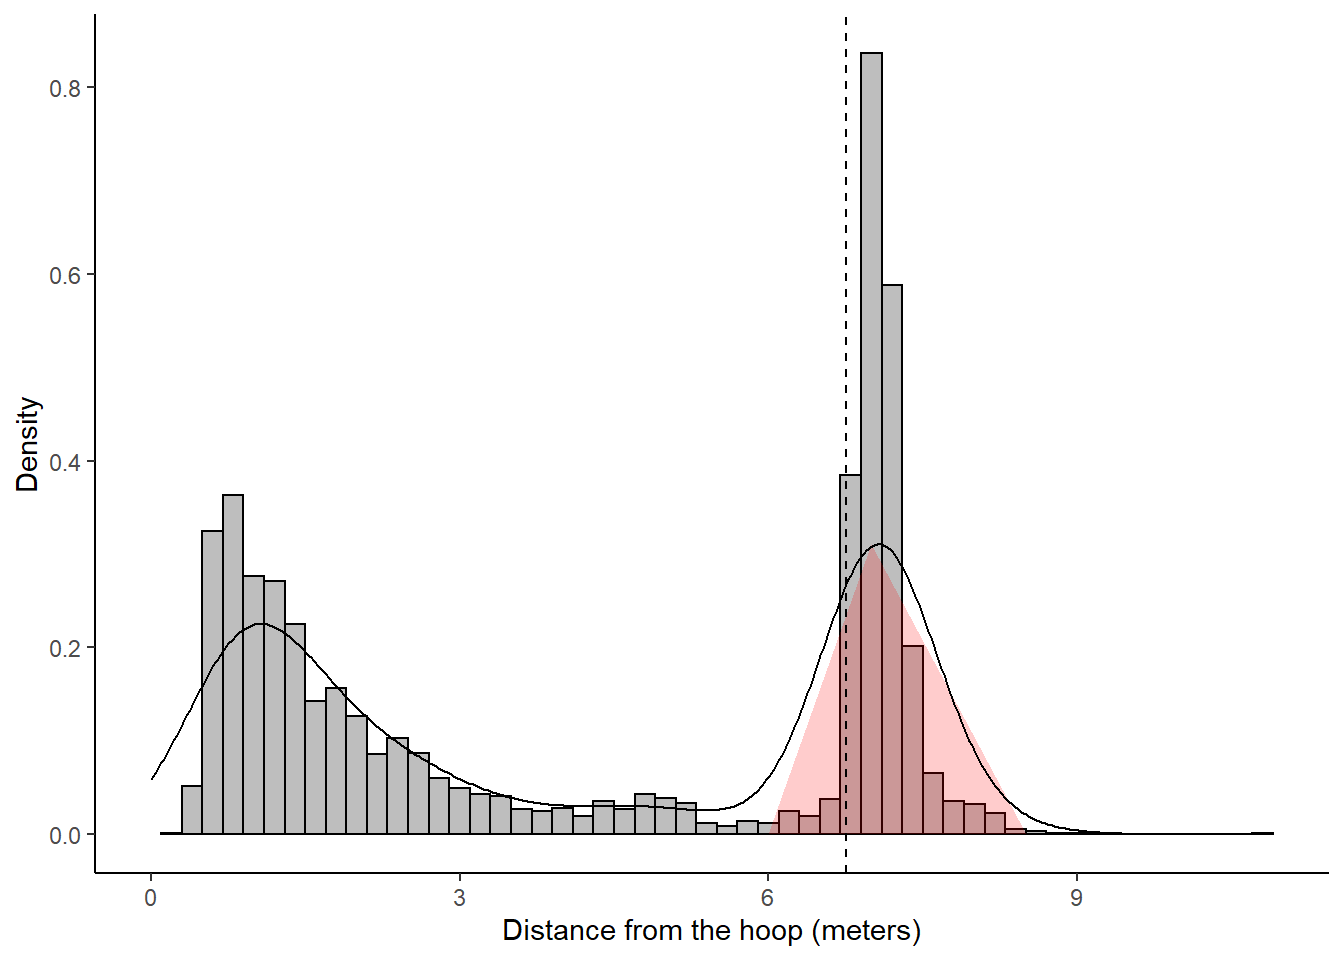 Estimating the area under the curve of a density plot